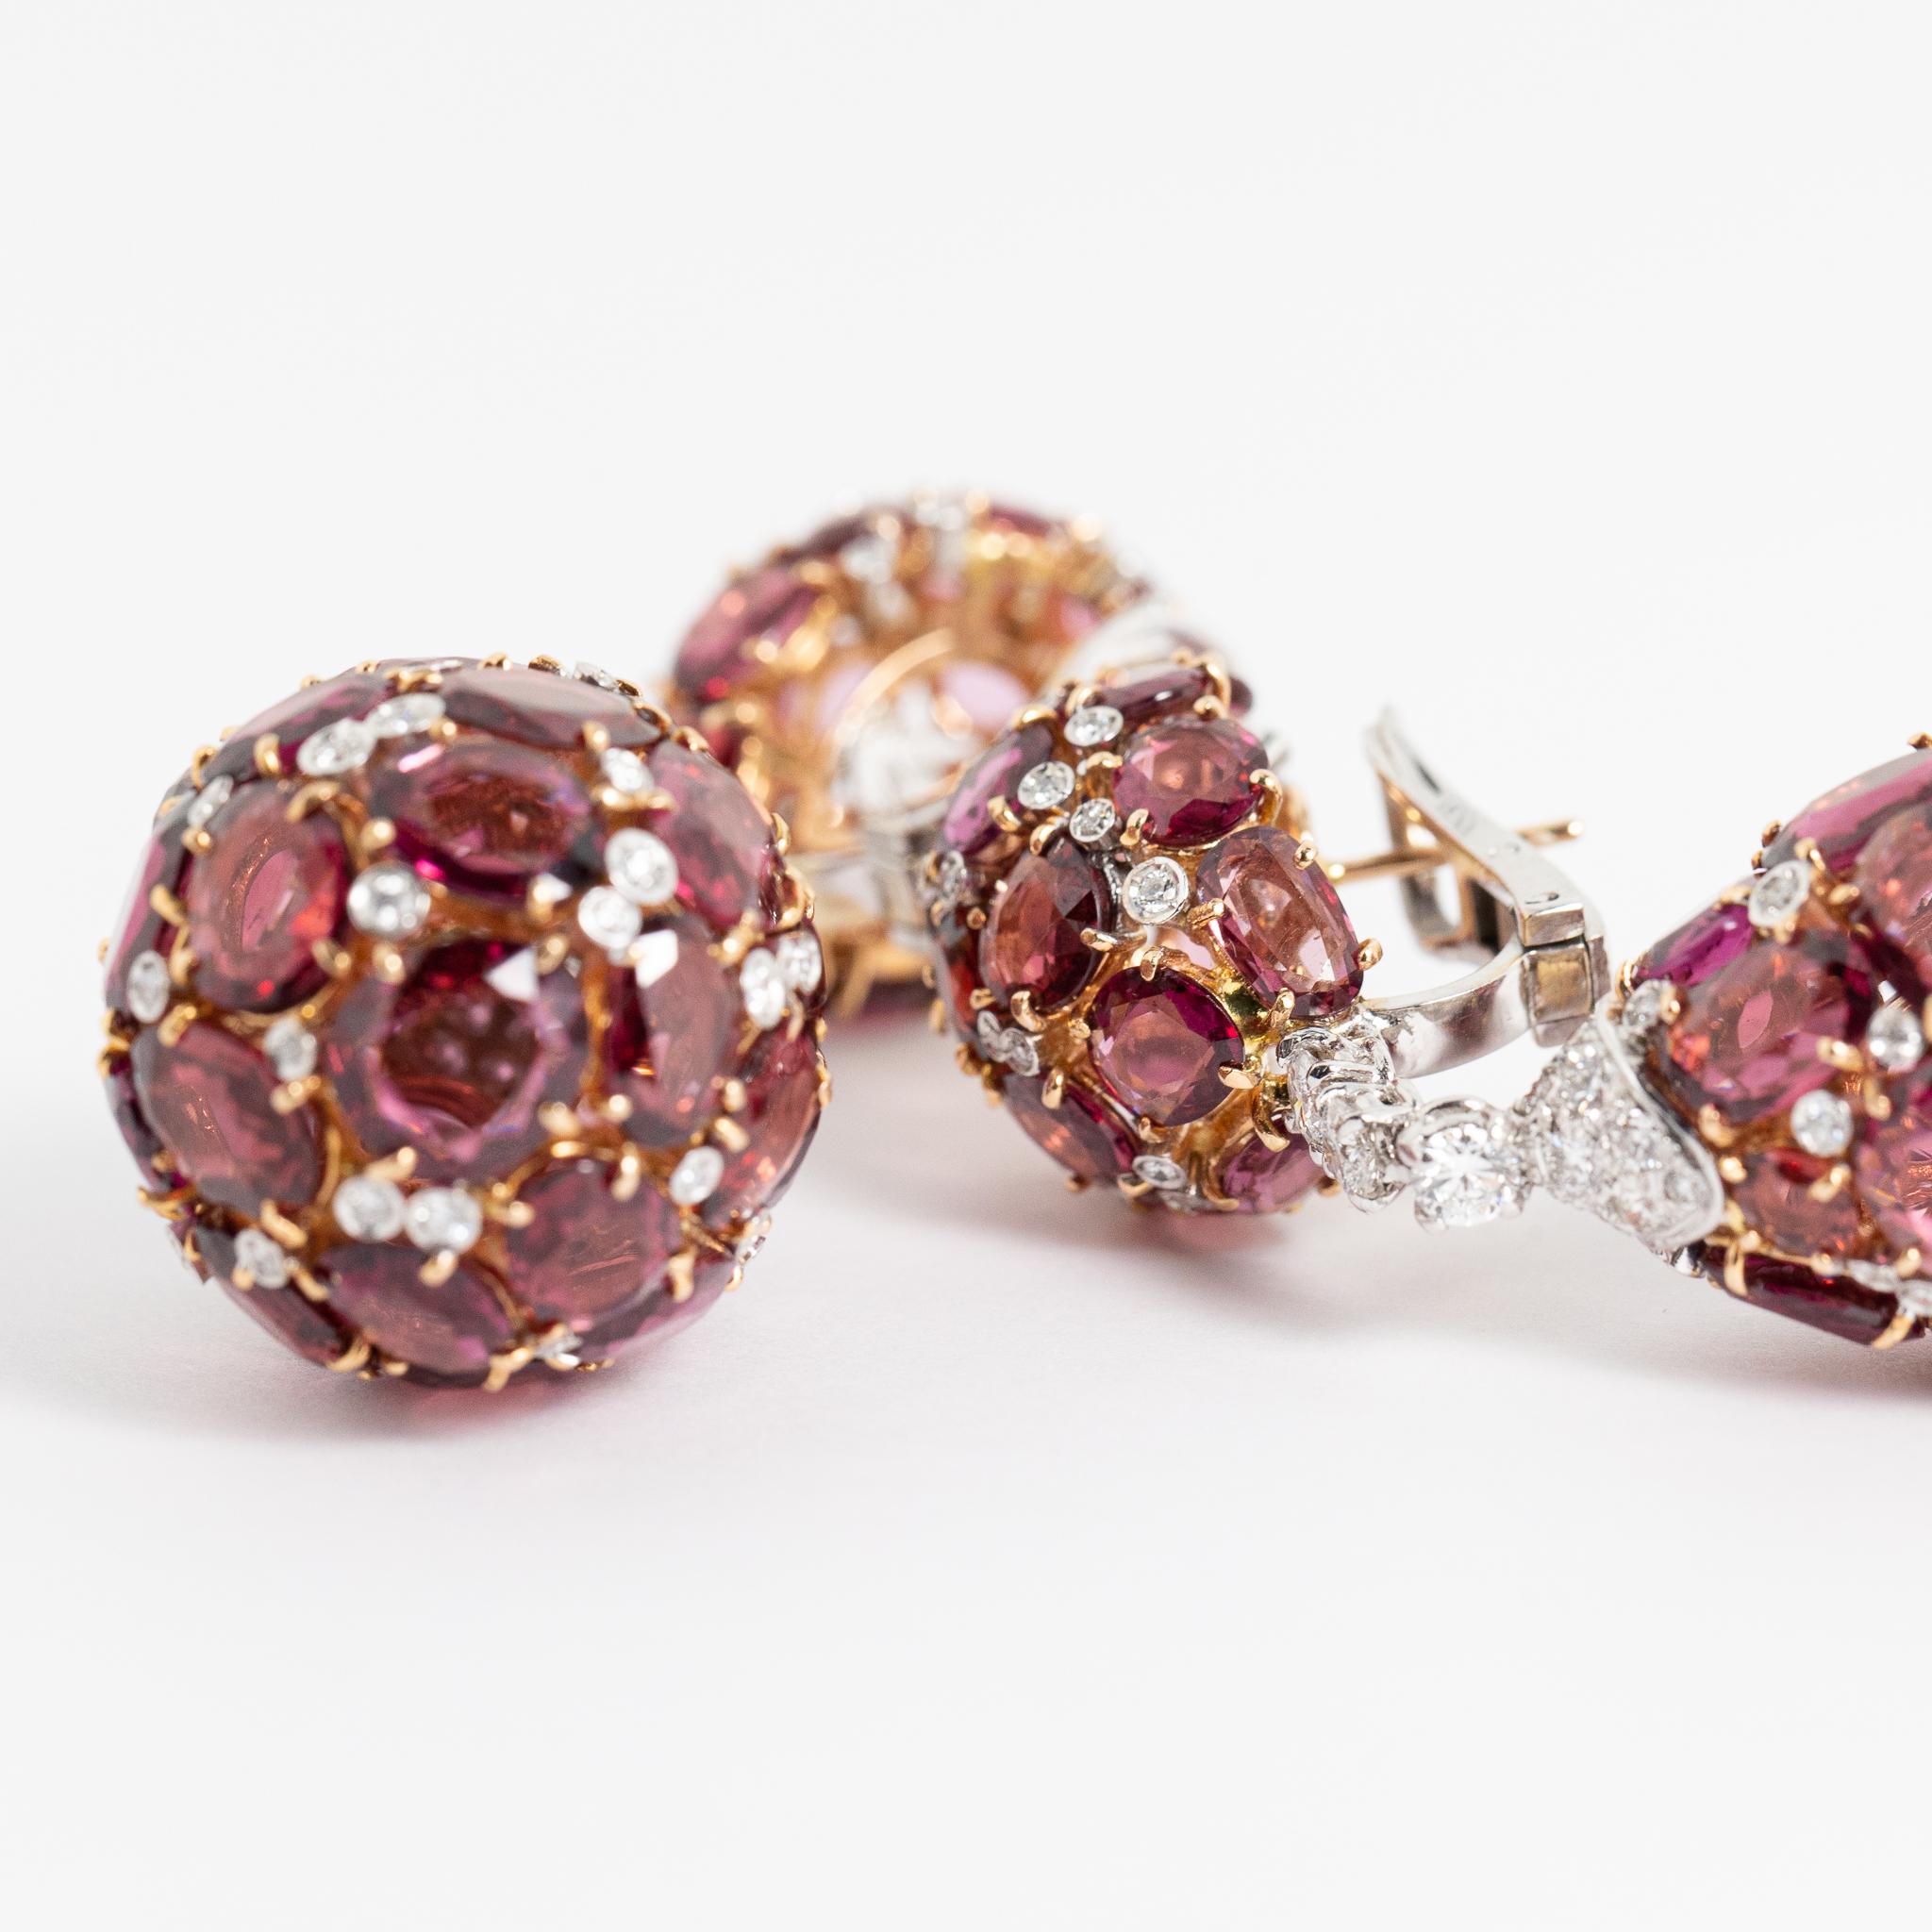 Earrings made of 18 kt. white and rose gold with diamonds and rhodolites.
These one-of-a-kind earrings are designed as two drops connected by a diamond trilogy.
Entirely made in Italy, one of a kind.

Round-cut diamonds: ct. 3.49 ( H-I color /